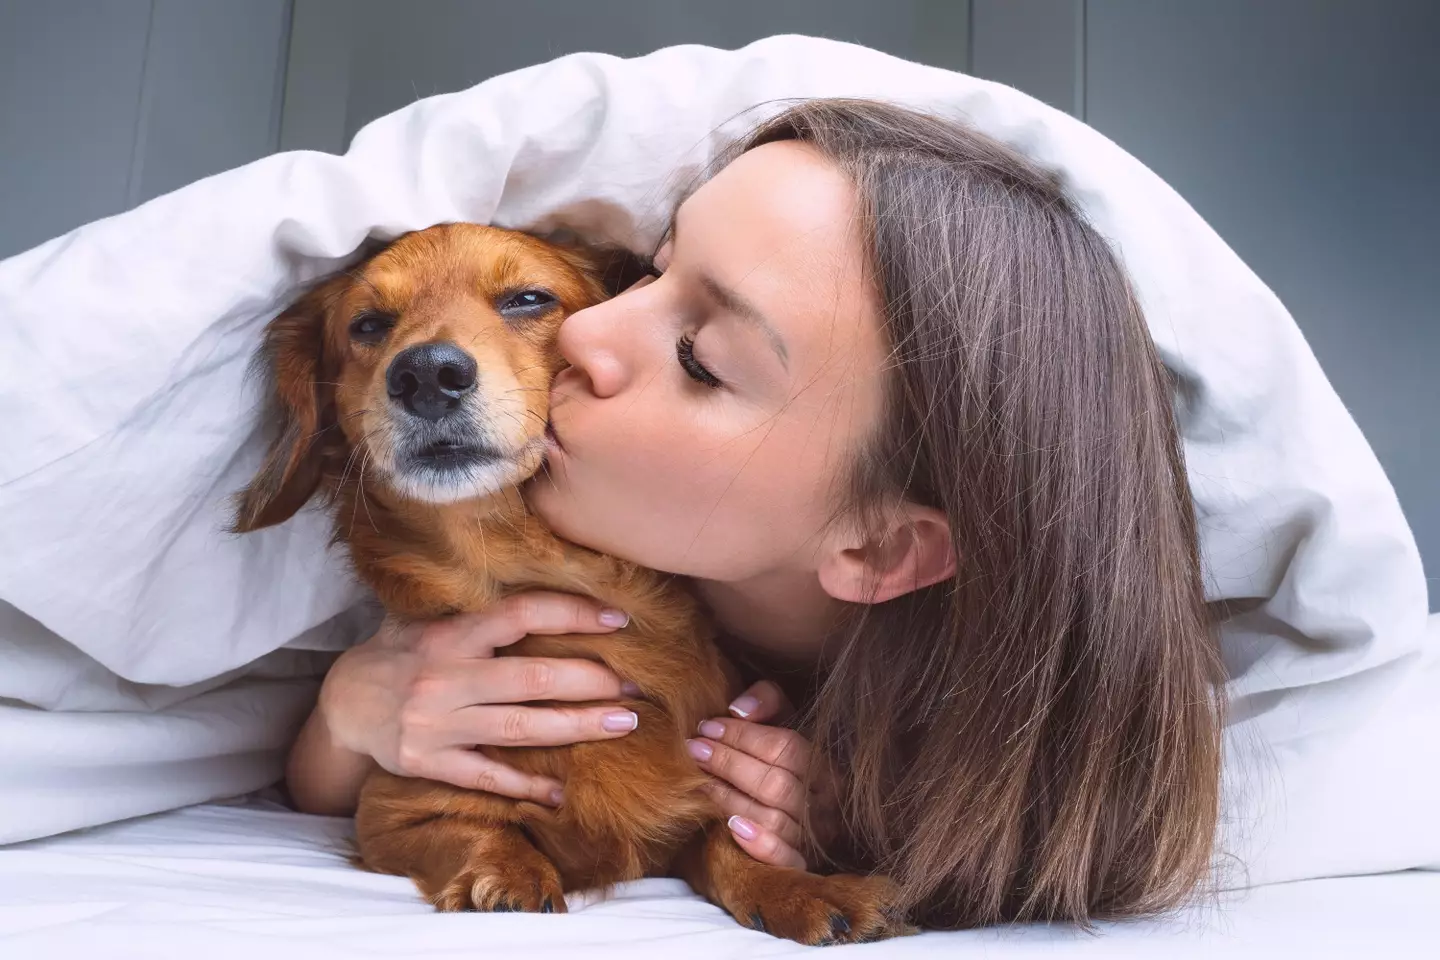 Experts have warned dog owners about sleeping with their pets.